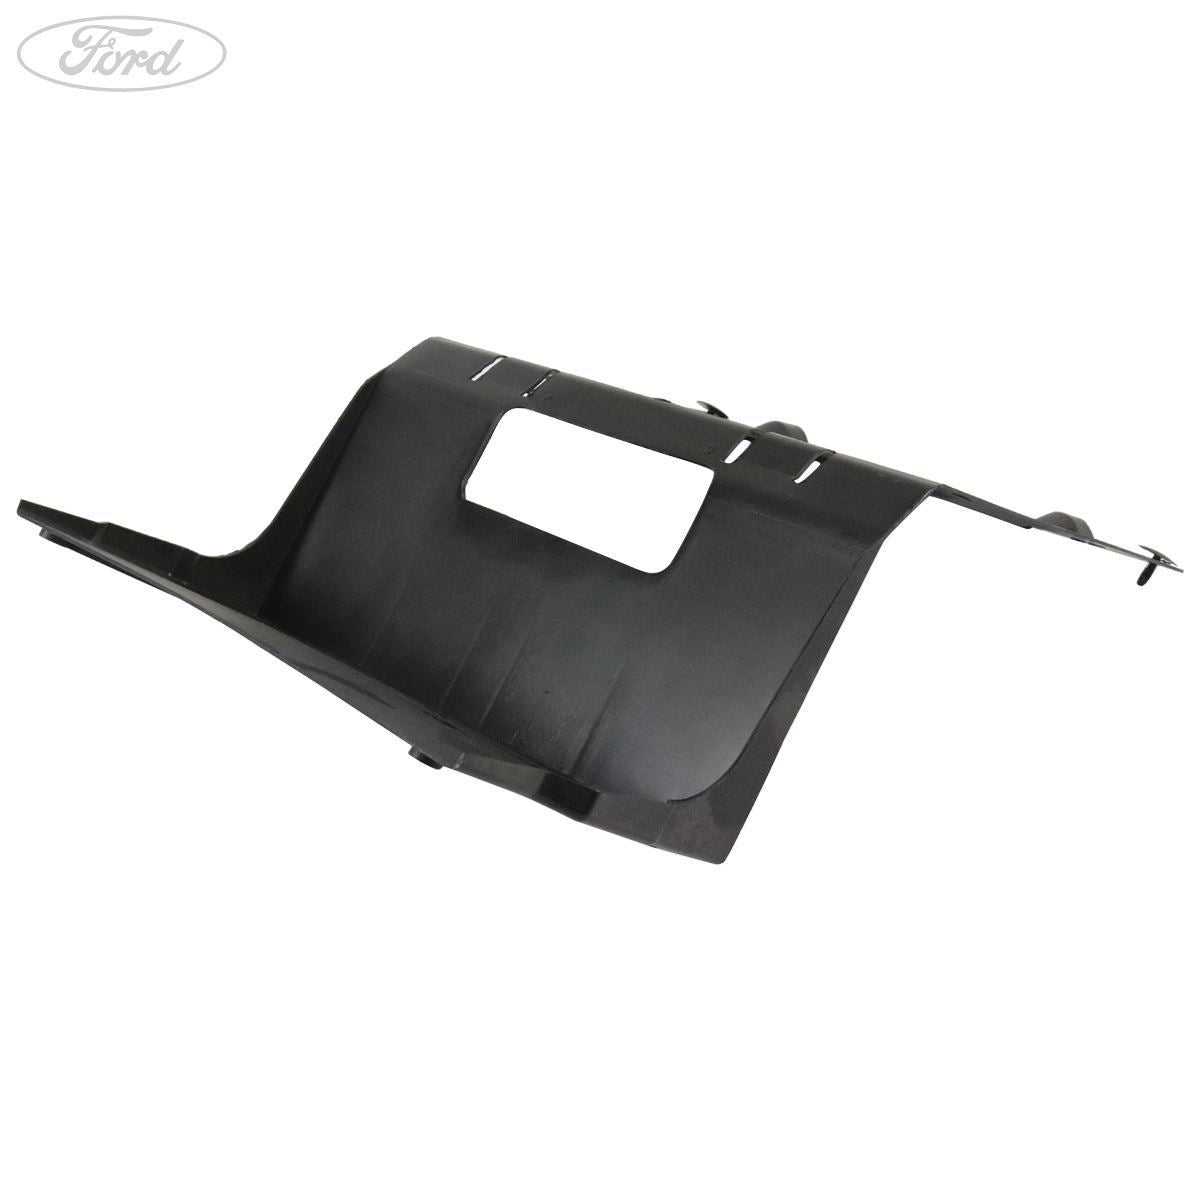 Ford, TRANSIT MK7 BATTERY COVER PANEL TRIM